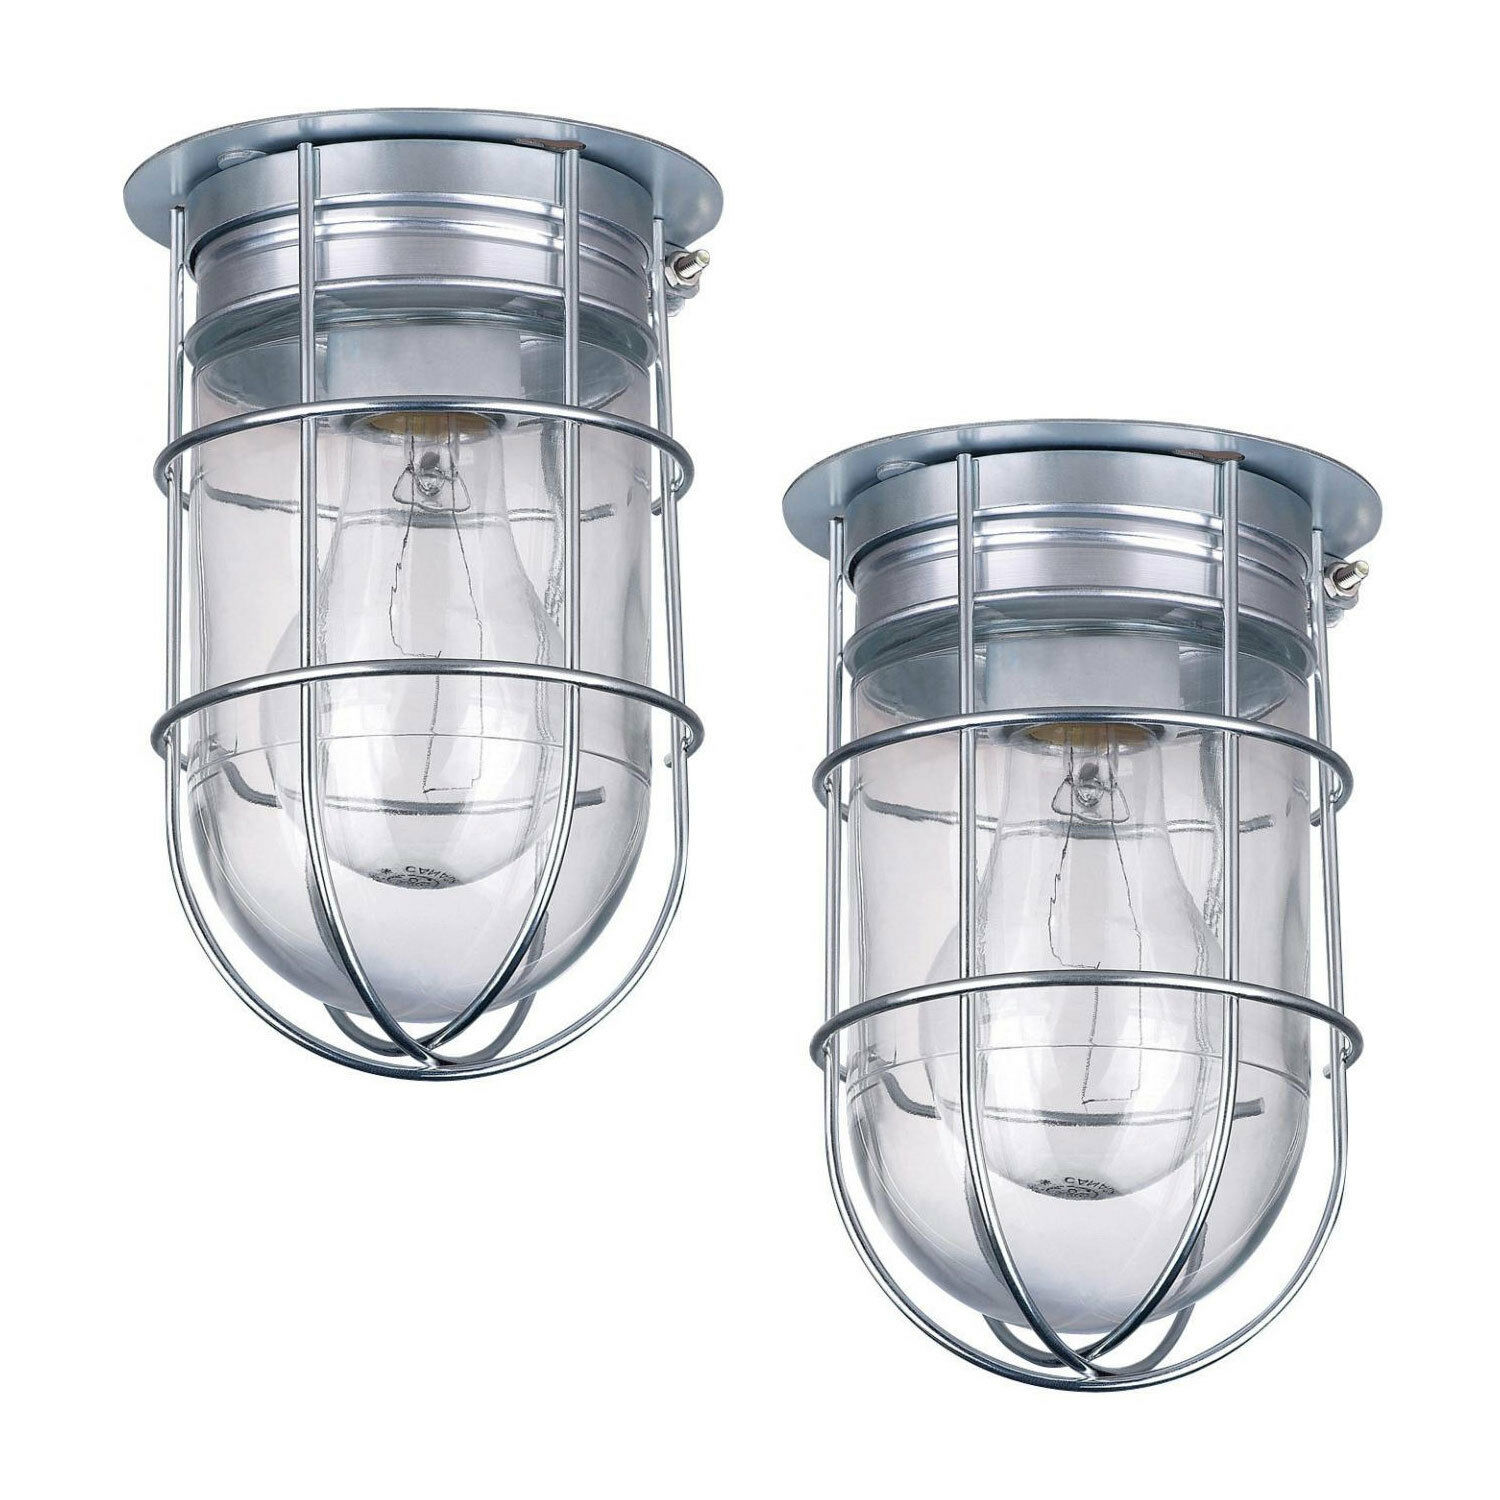 2 Pack Of Outdoor Caged Light Barn Ceiling Exterior Wall All Weather With Cage